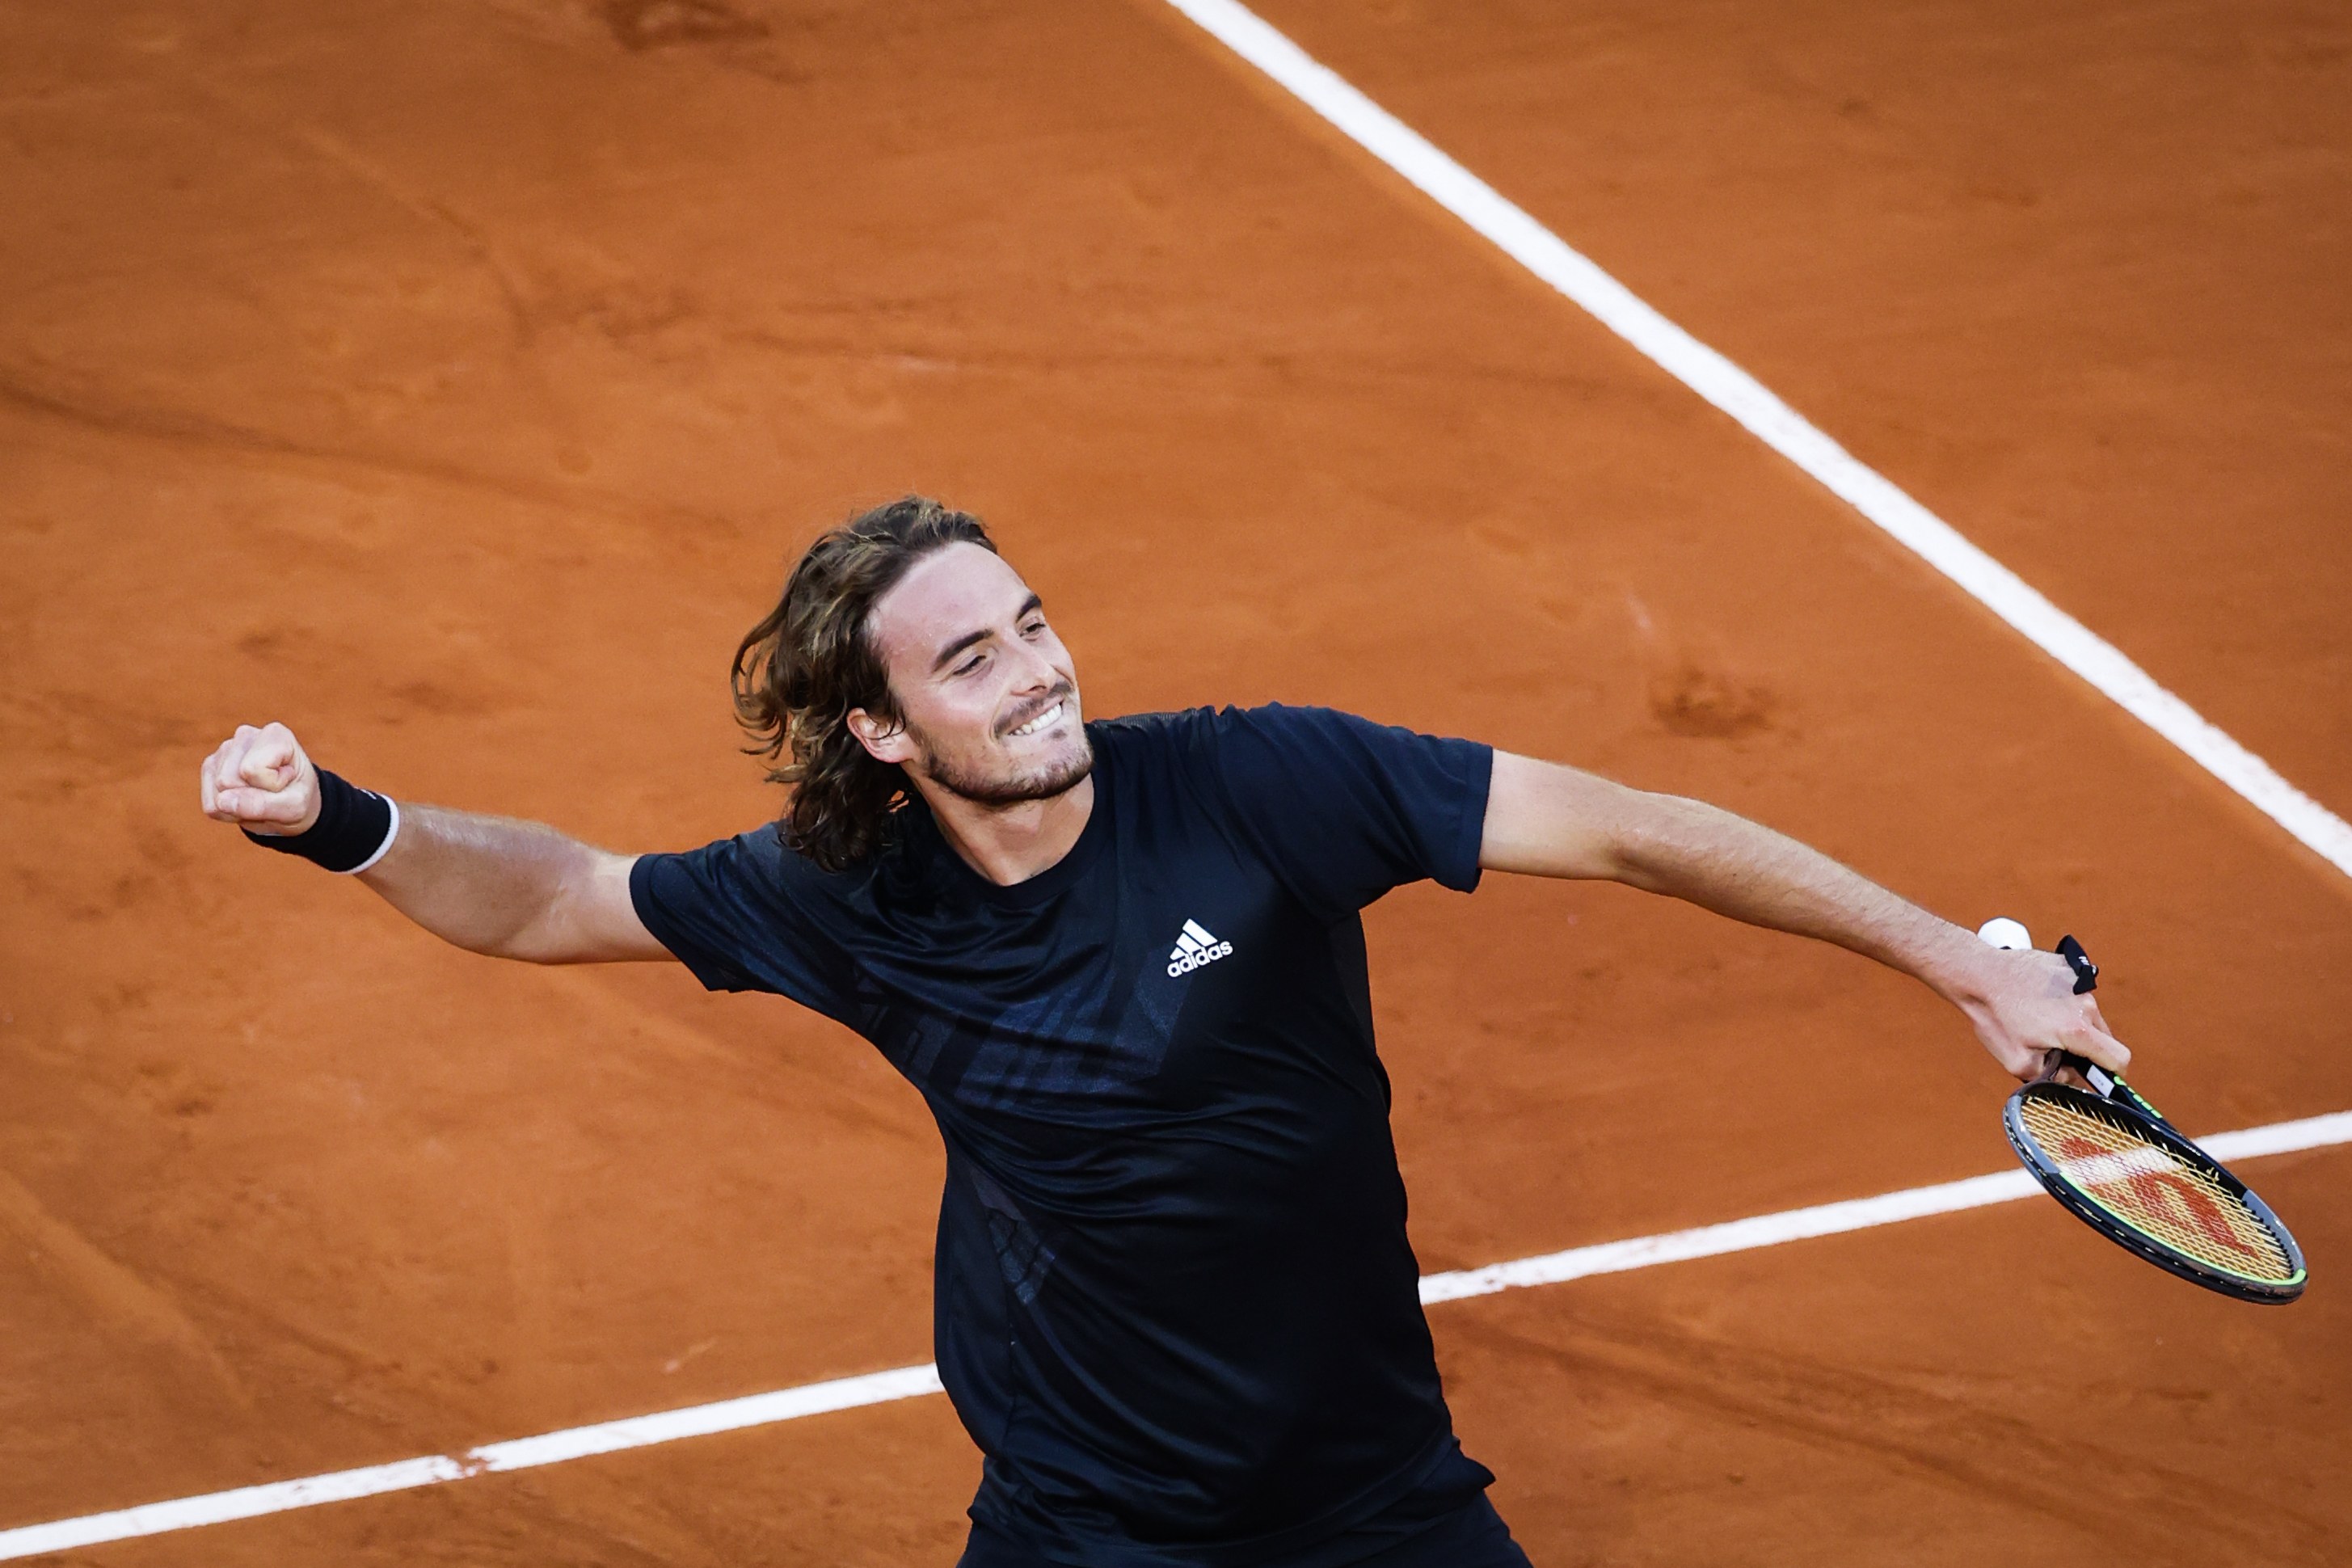 Redemption of Stef After US Open anguish, Tsitsipas thrives in Paris